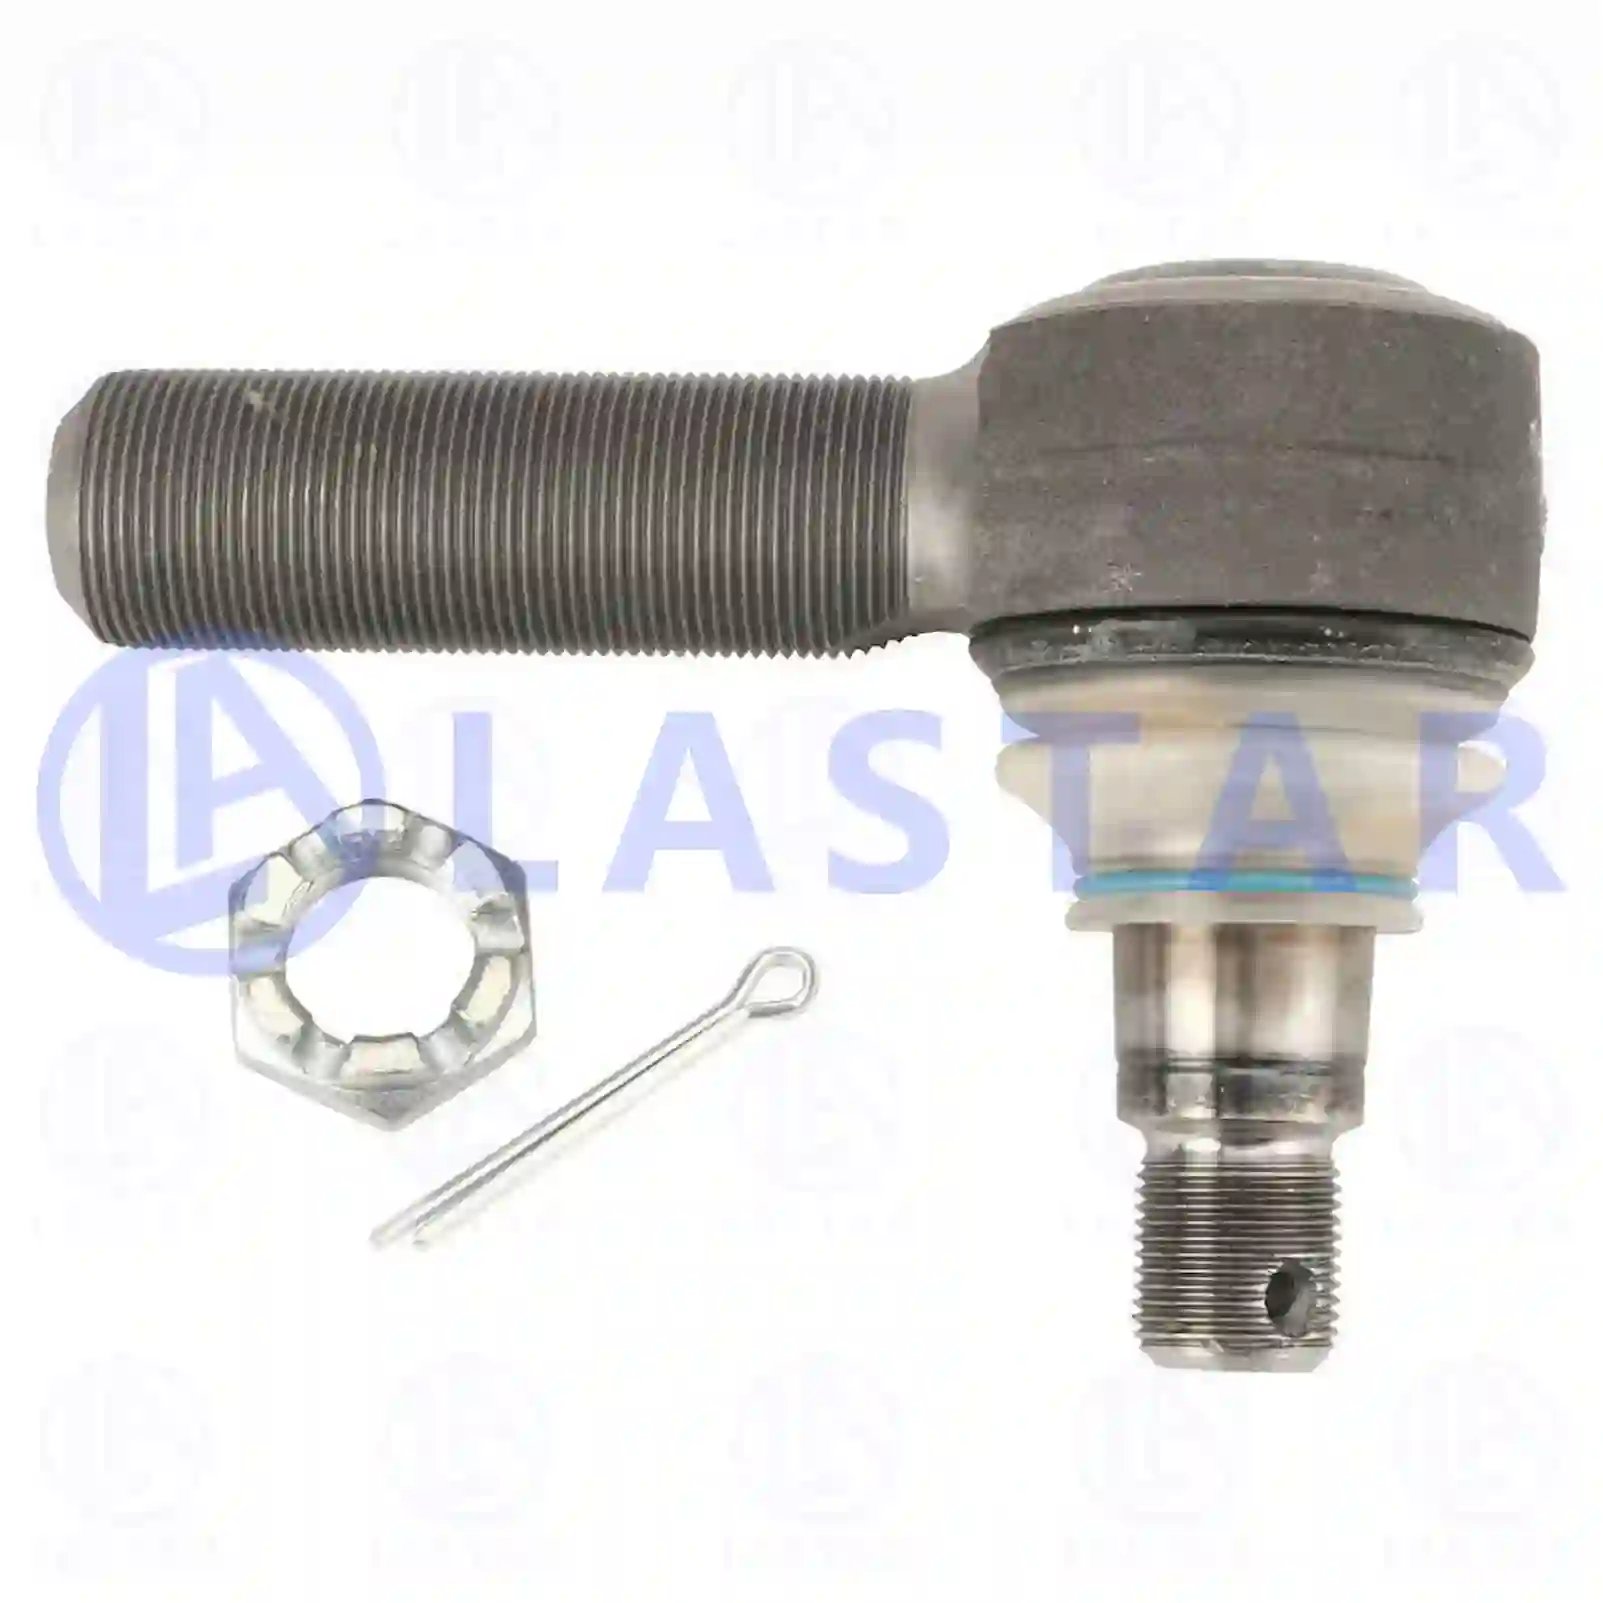 Ball joint, left hand thread, 77705608, 1689605, 1892665, 1923962, AMPA345, 04688942, 08582333, 4688942, 8582333, AMPA345, ZG40358-0008 ||  77705608 Lastar Spare Part | Truck Spare Parts, Auotomotive Spare Parts Ball joint, left hand thread, 77705608, 1689605, 1892665, 1923962, AMPA345, 04688942, 08582333, 4688942, 8582333, AMPA345, ZG40358-0008 ||  77705608 Lastar Spare Part | Truck Spare Parts, Auotomotive Spare Parts